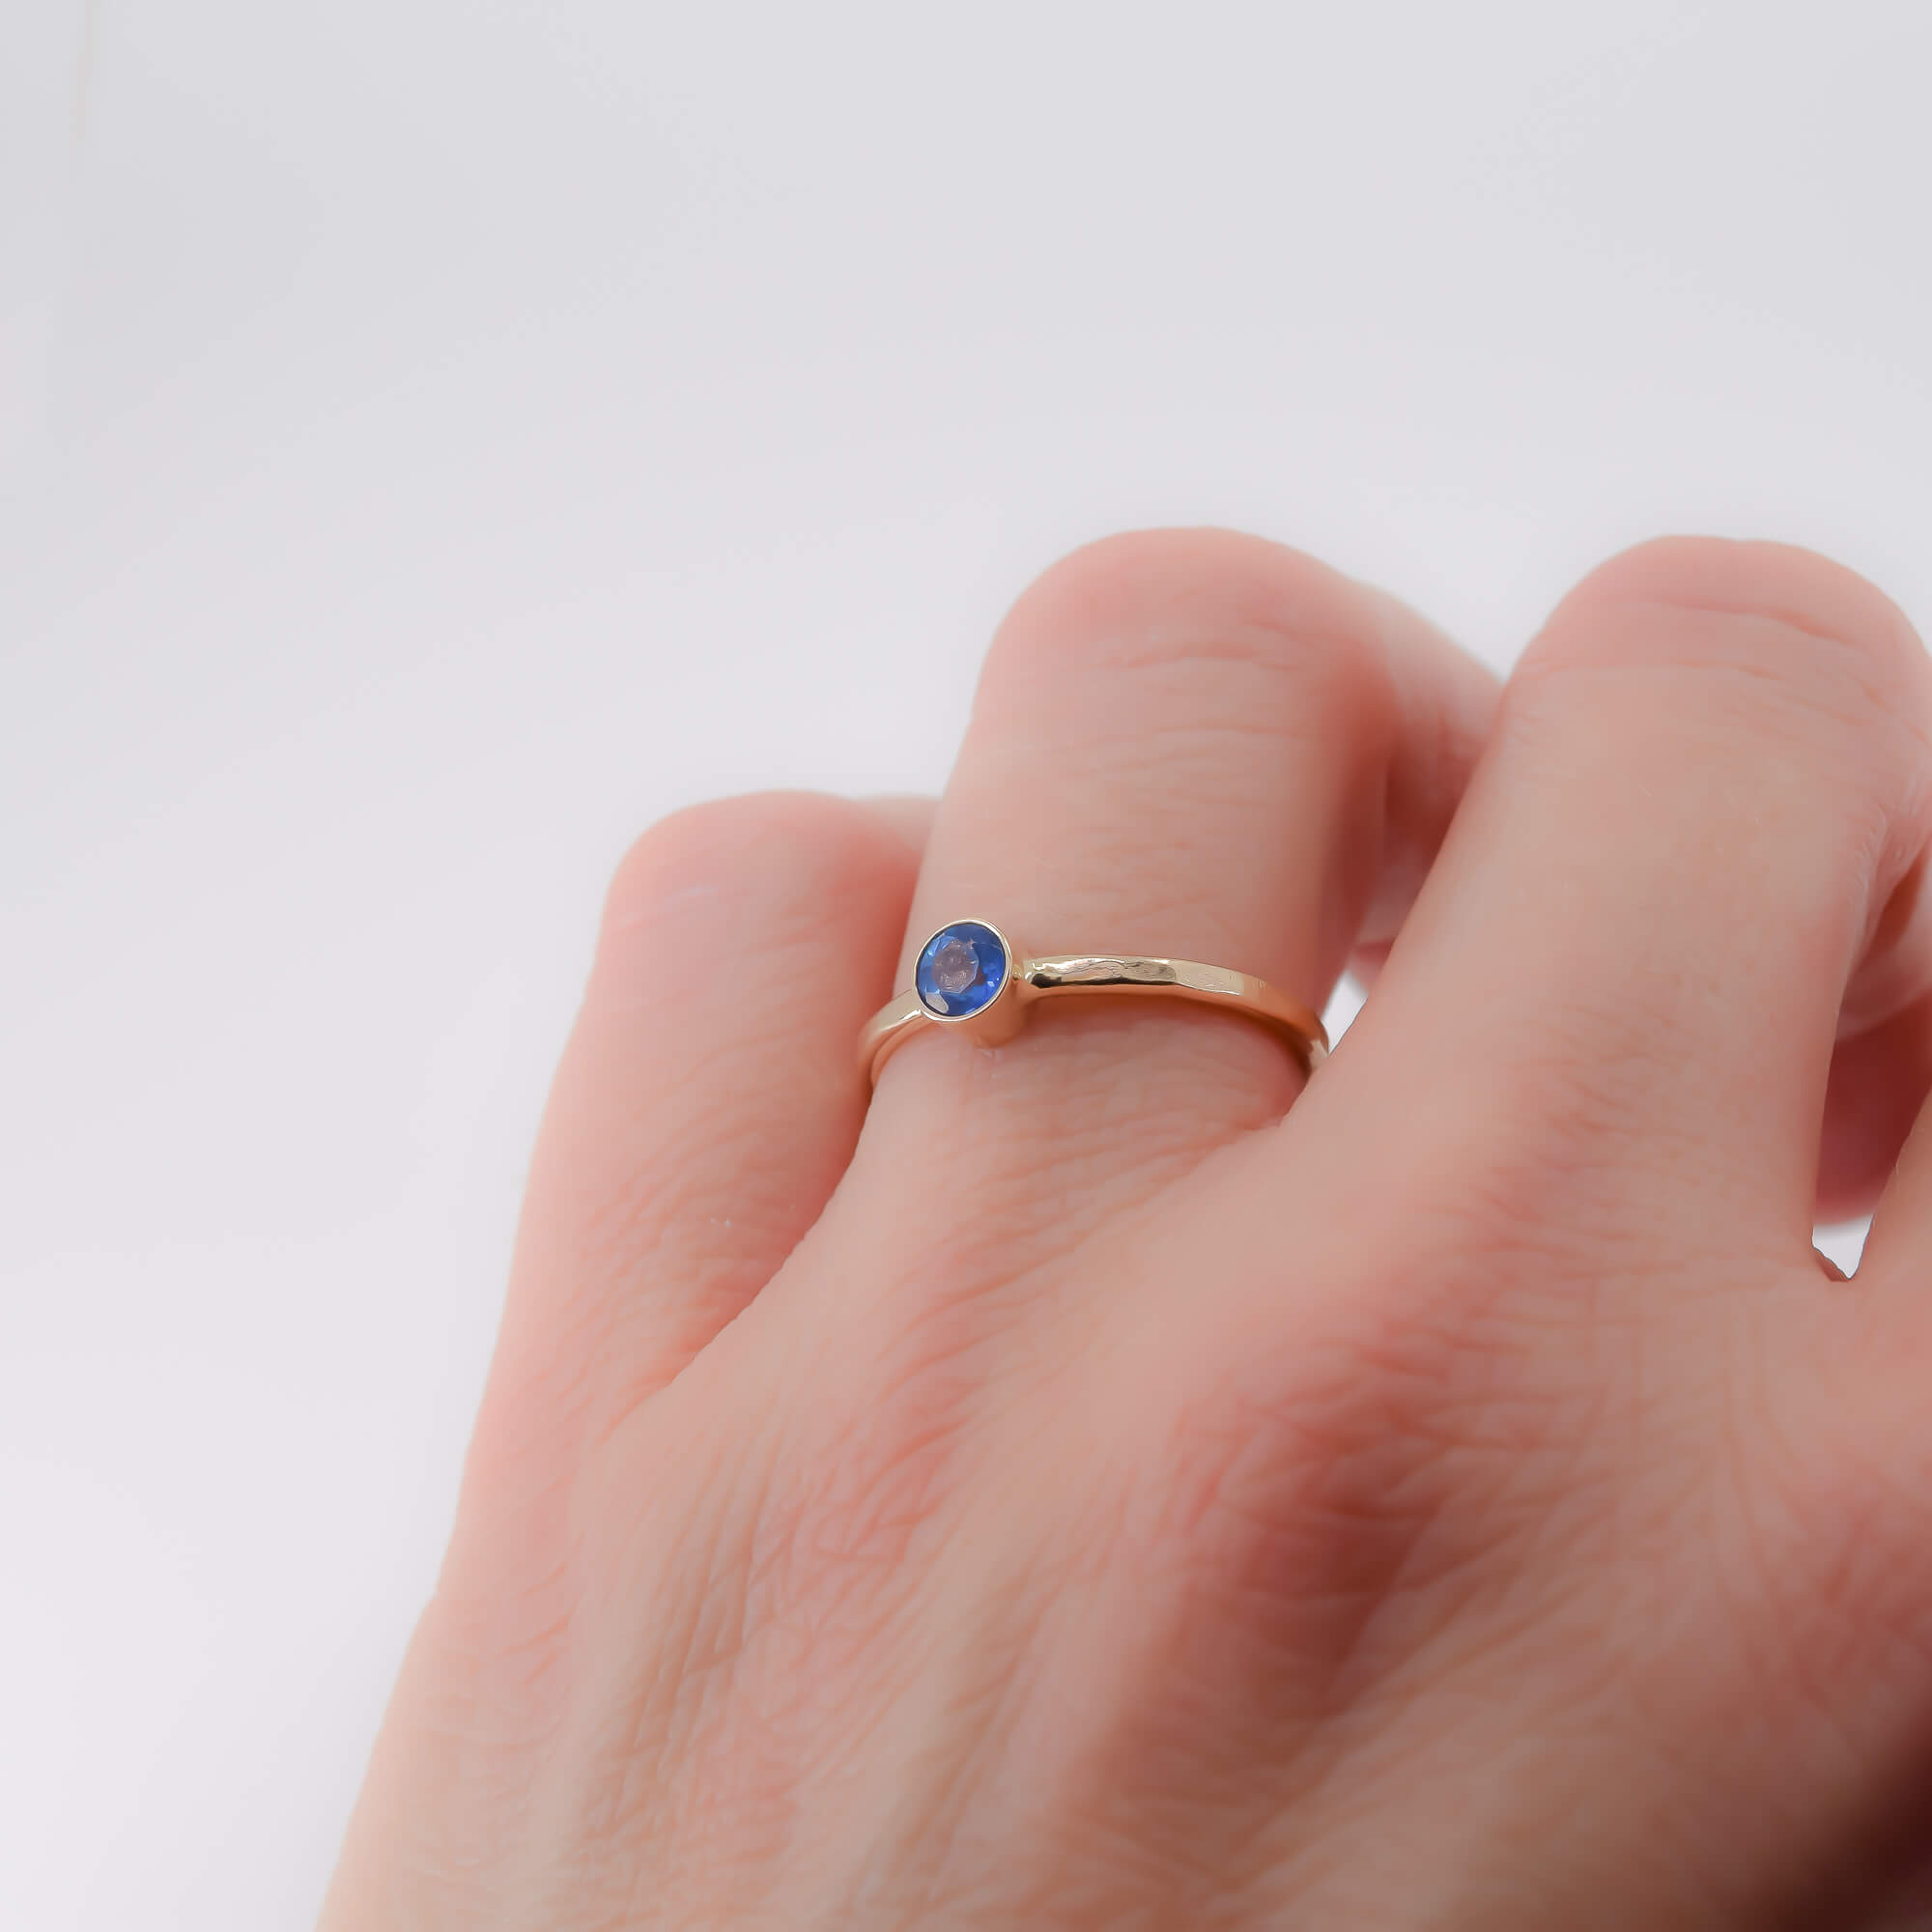 14K yellow gold thin stackable ring with ice blue topaz stone modeled on finger for scale